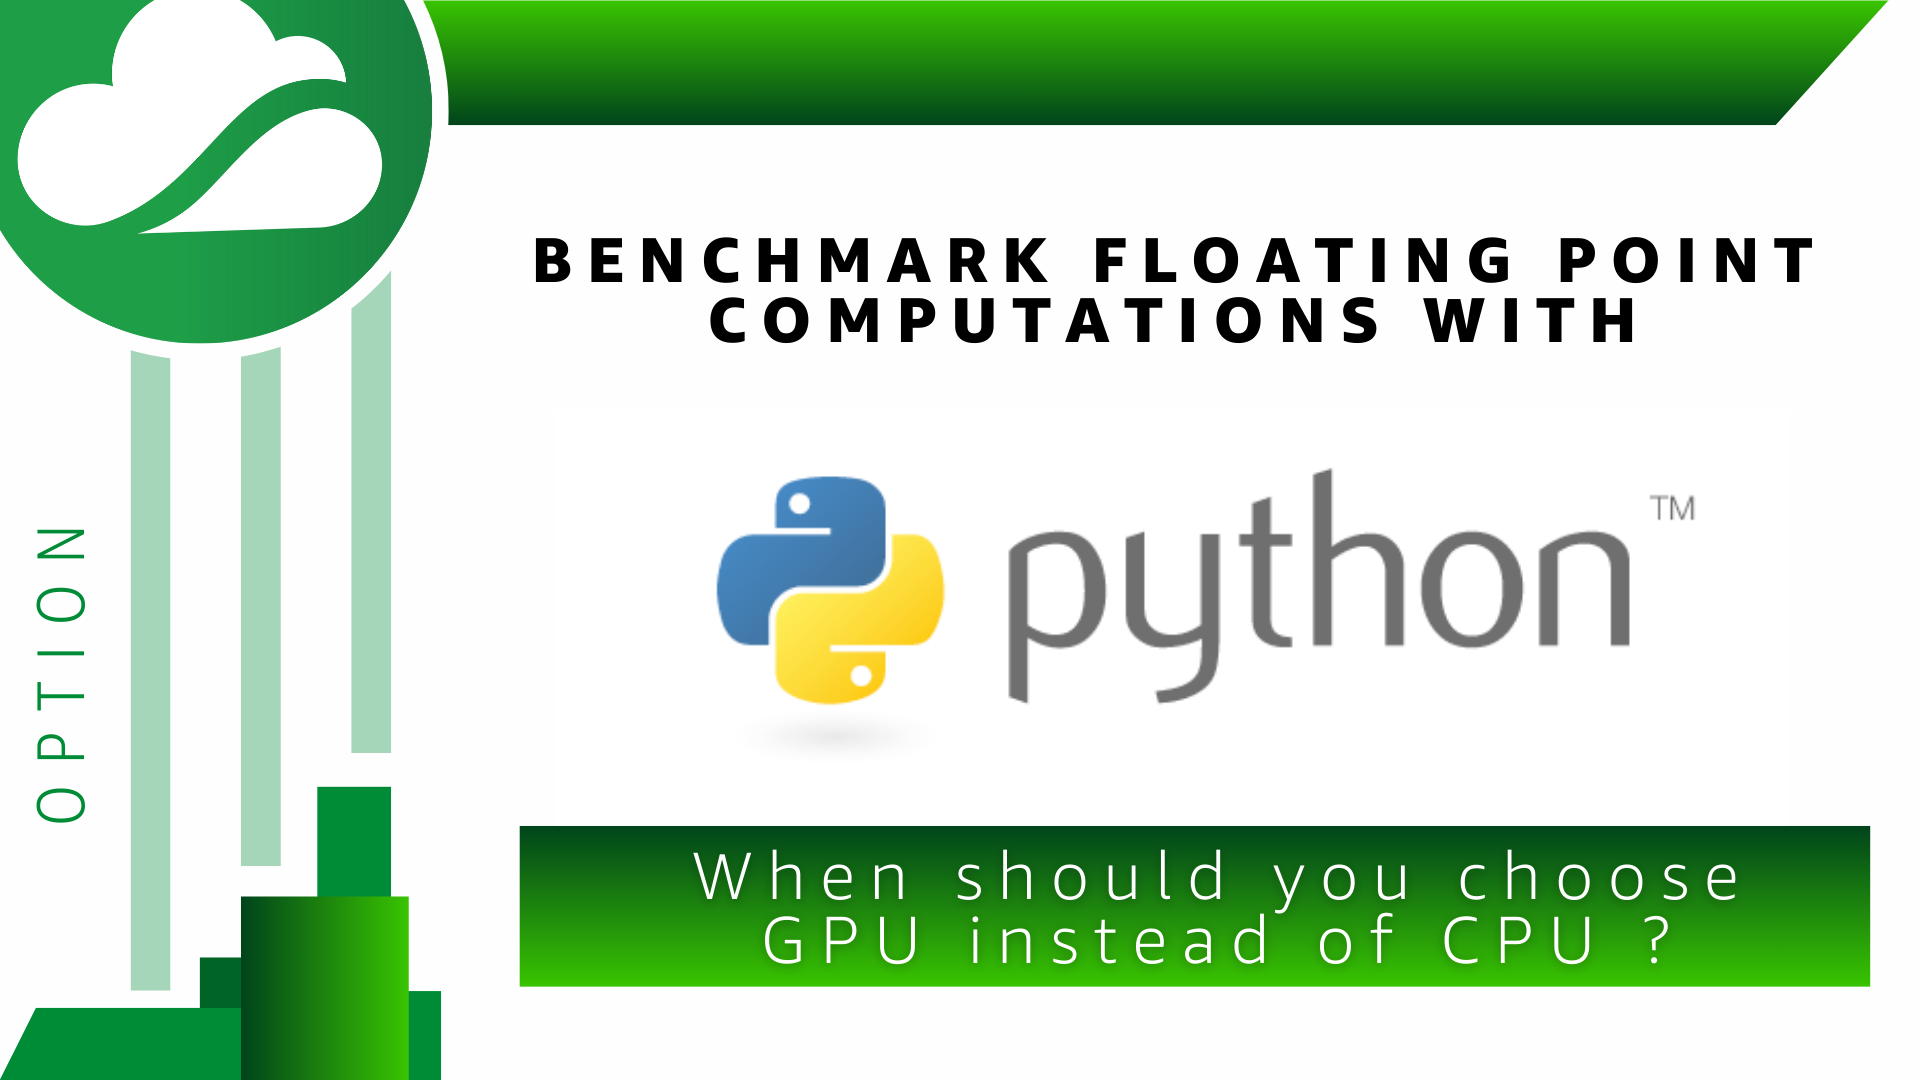 Benchmark floating point computations with Python